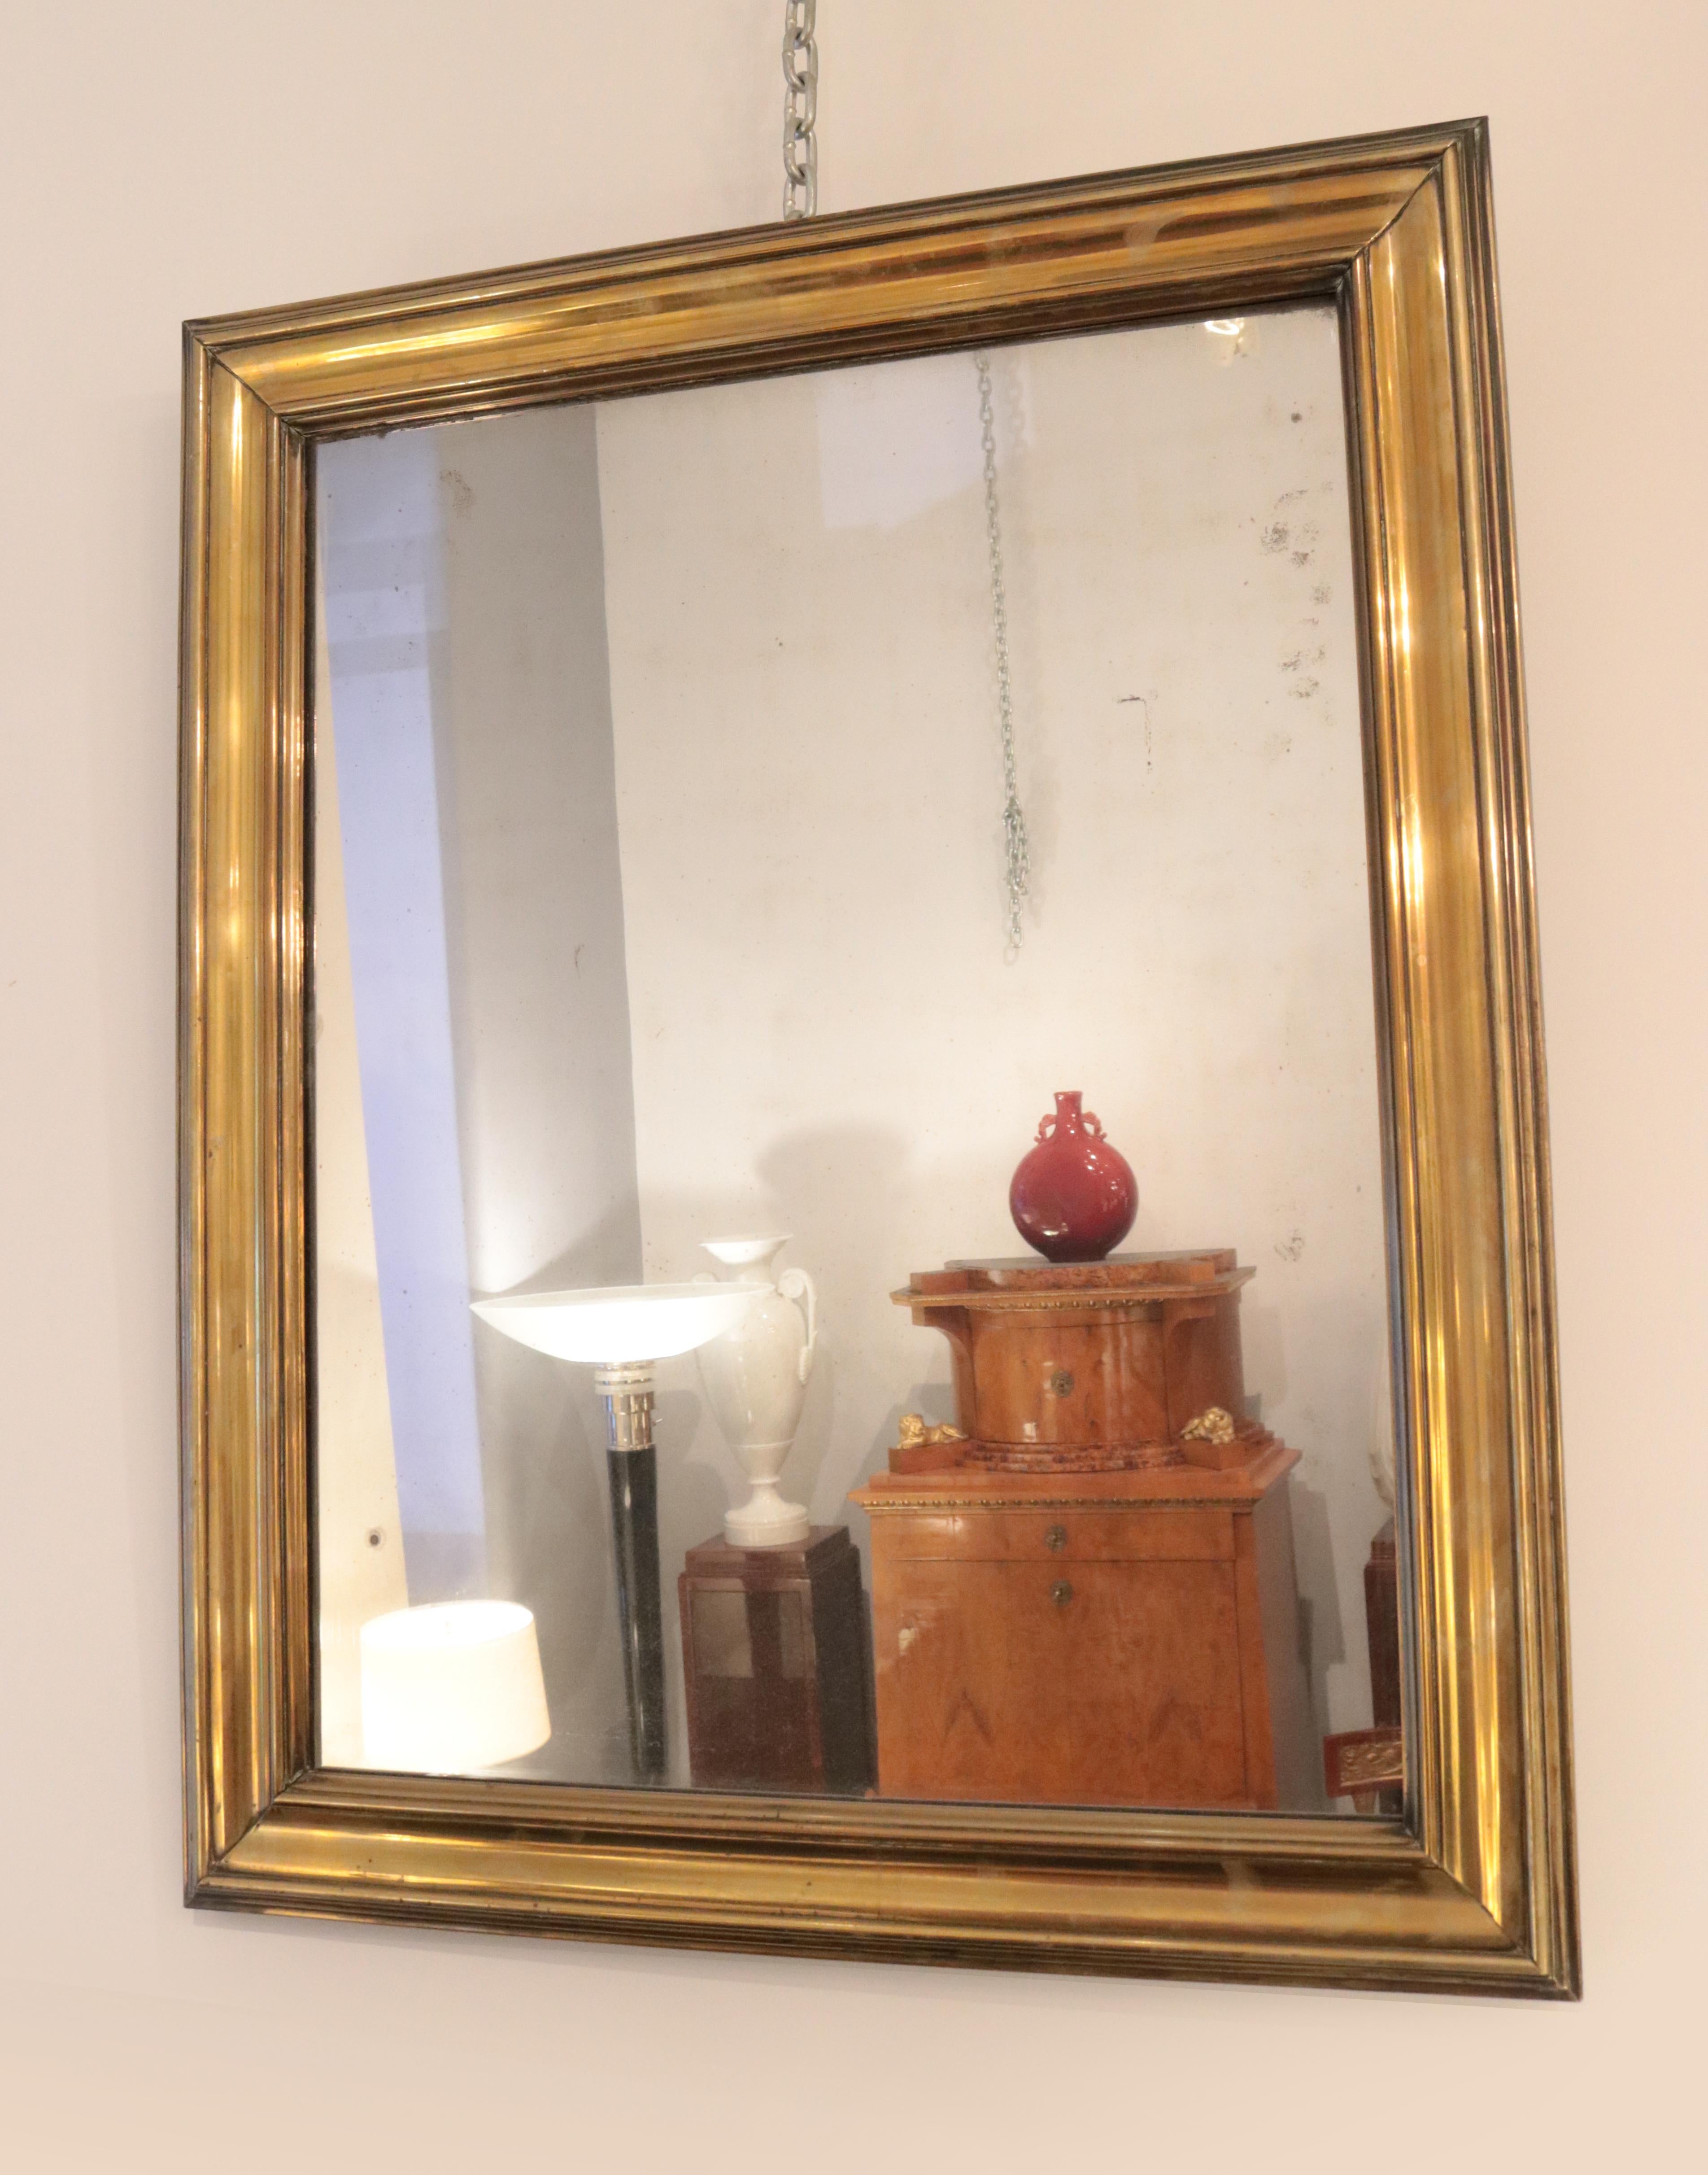 An early 19th century patinated brass mirror.
Patinated brass profiles over a wooden frame.